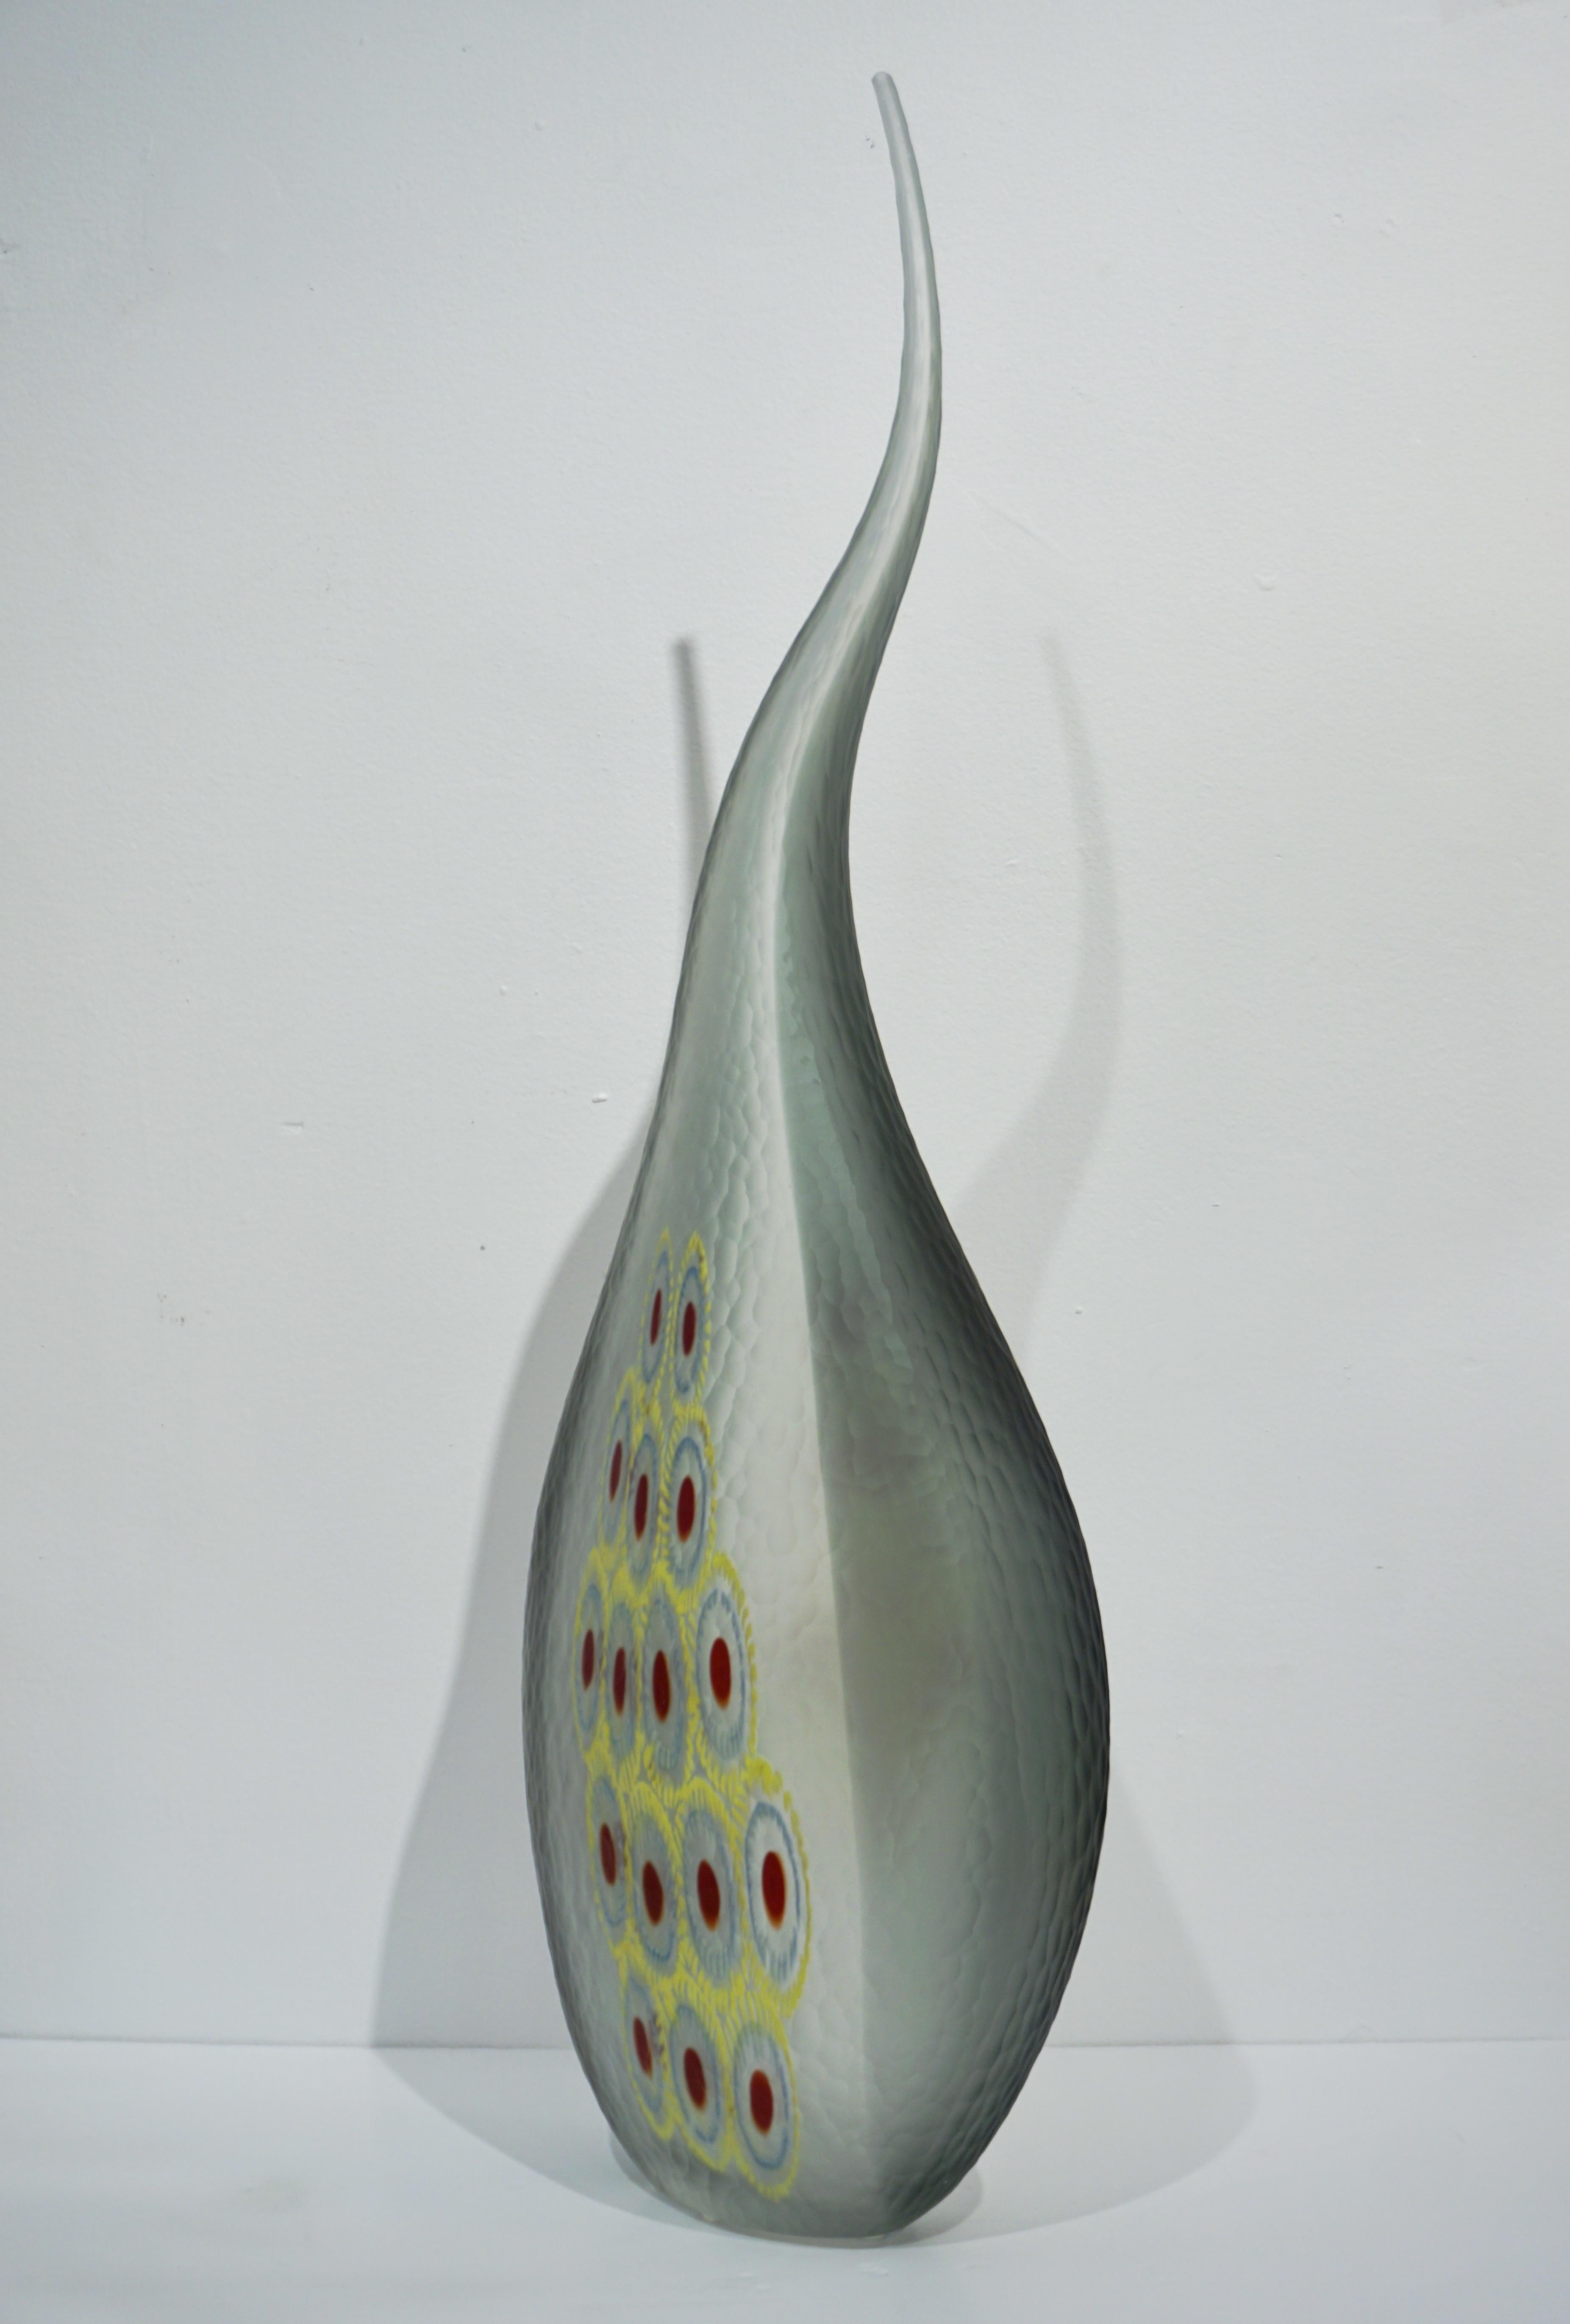 Organic Modern Dona Modern Art Glass Smoked Gray Sculptural Vase with Red and Yellow Murrine For Sale